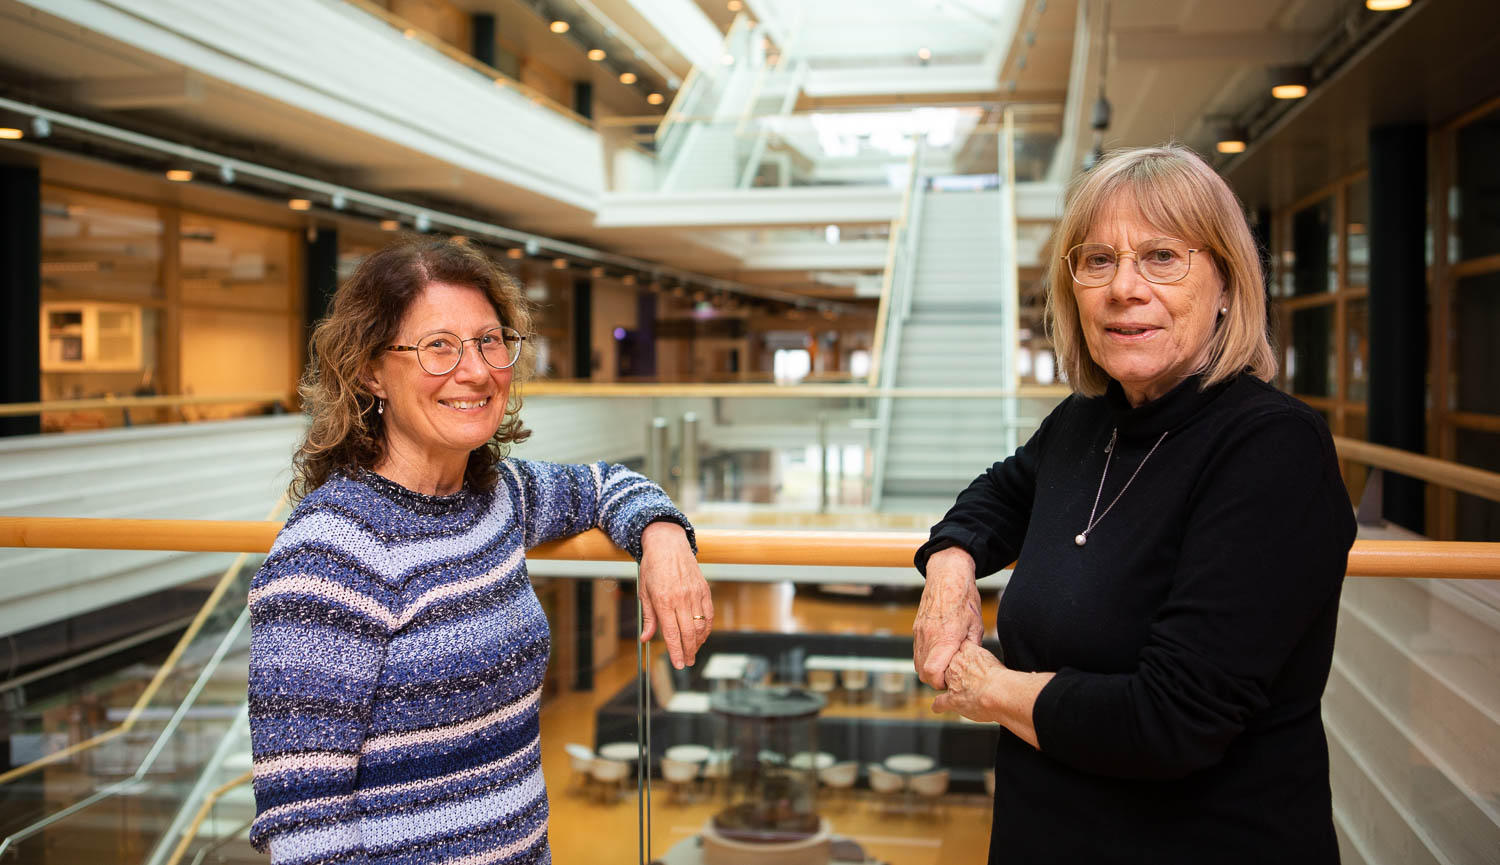 A picture of Karin Wiberg and Agneta Oskarsson standing in an atrium looking into the camera. In the background a modern interior with a large skylight.